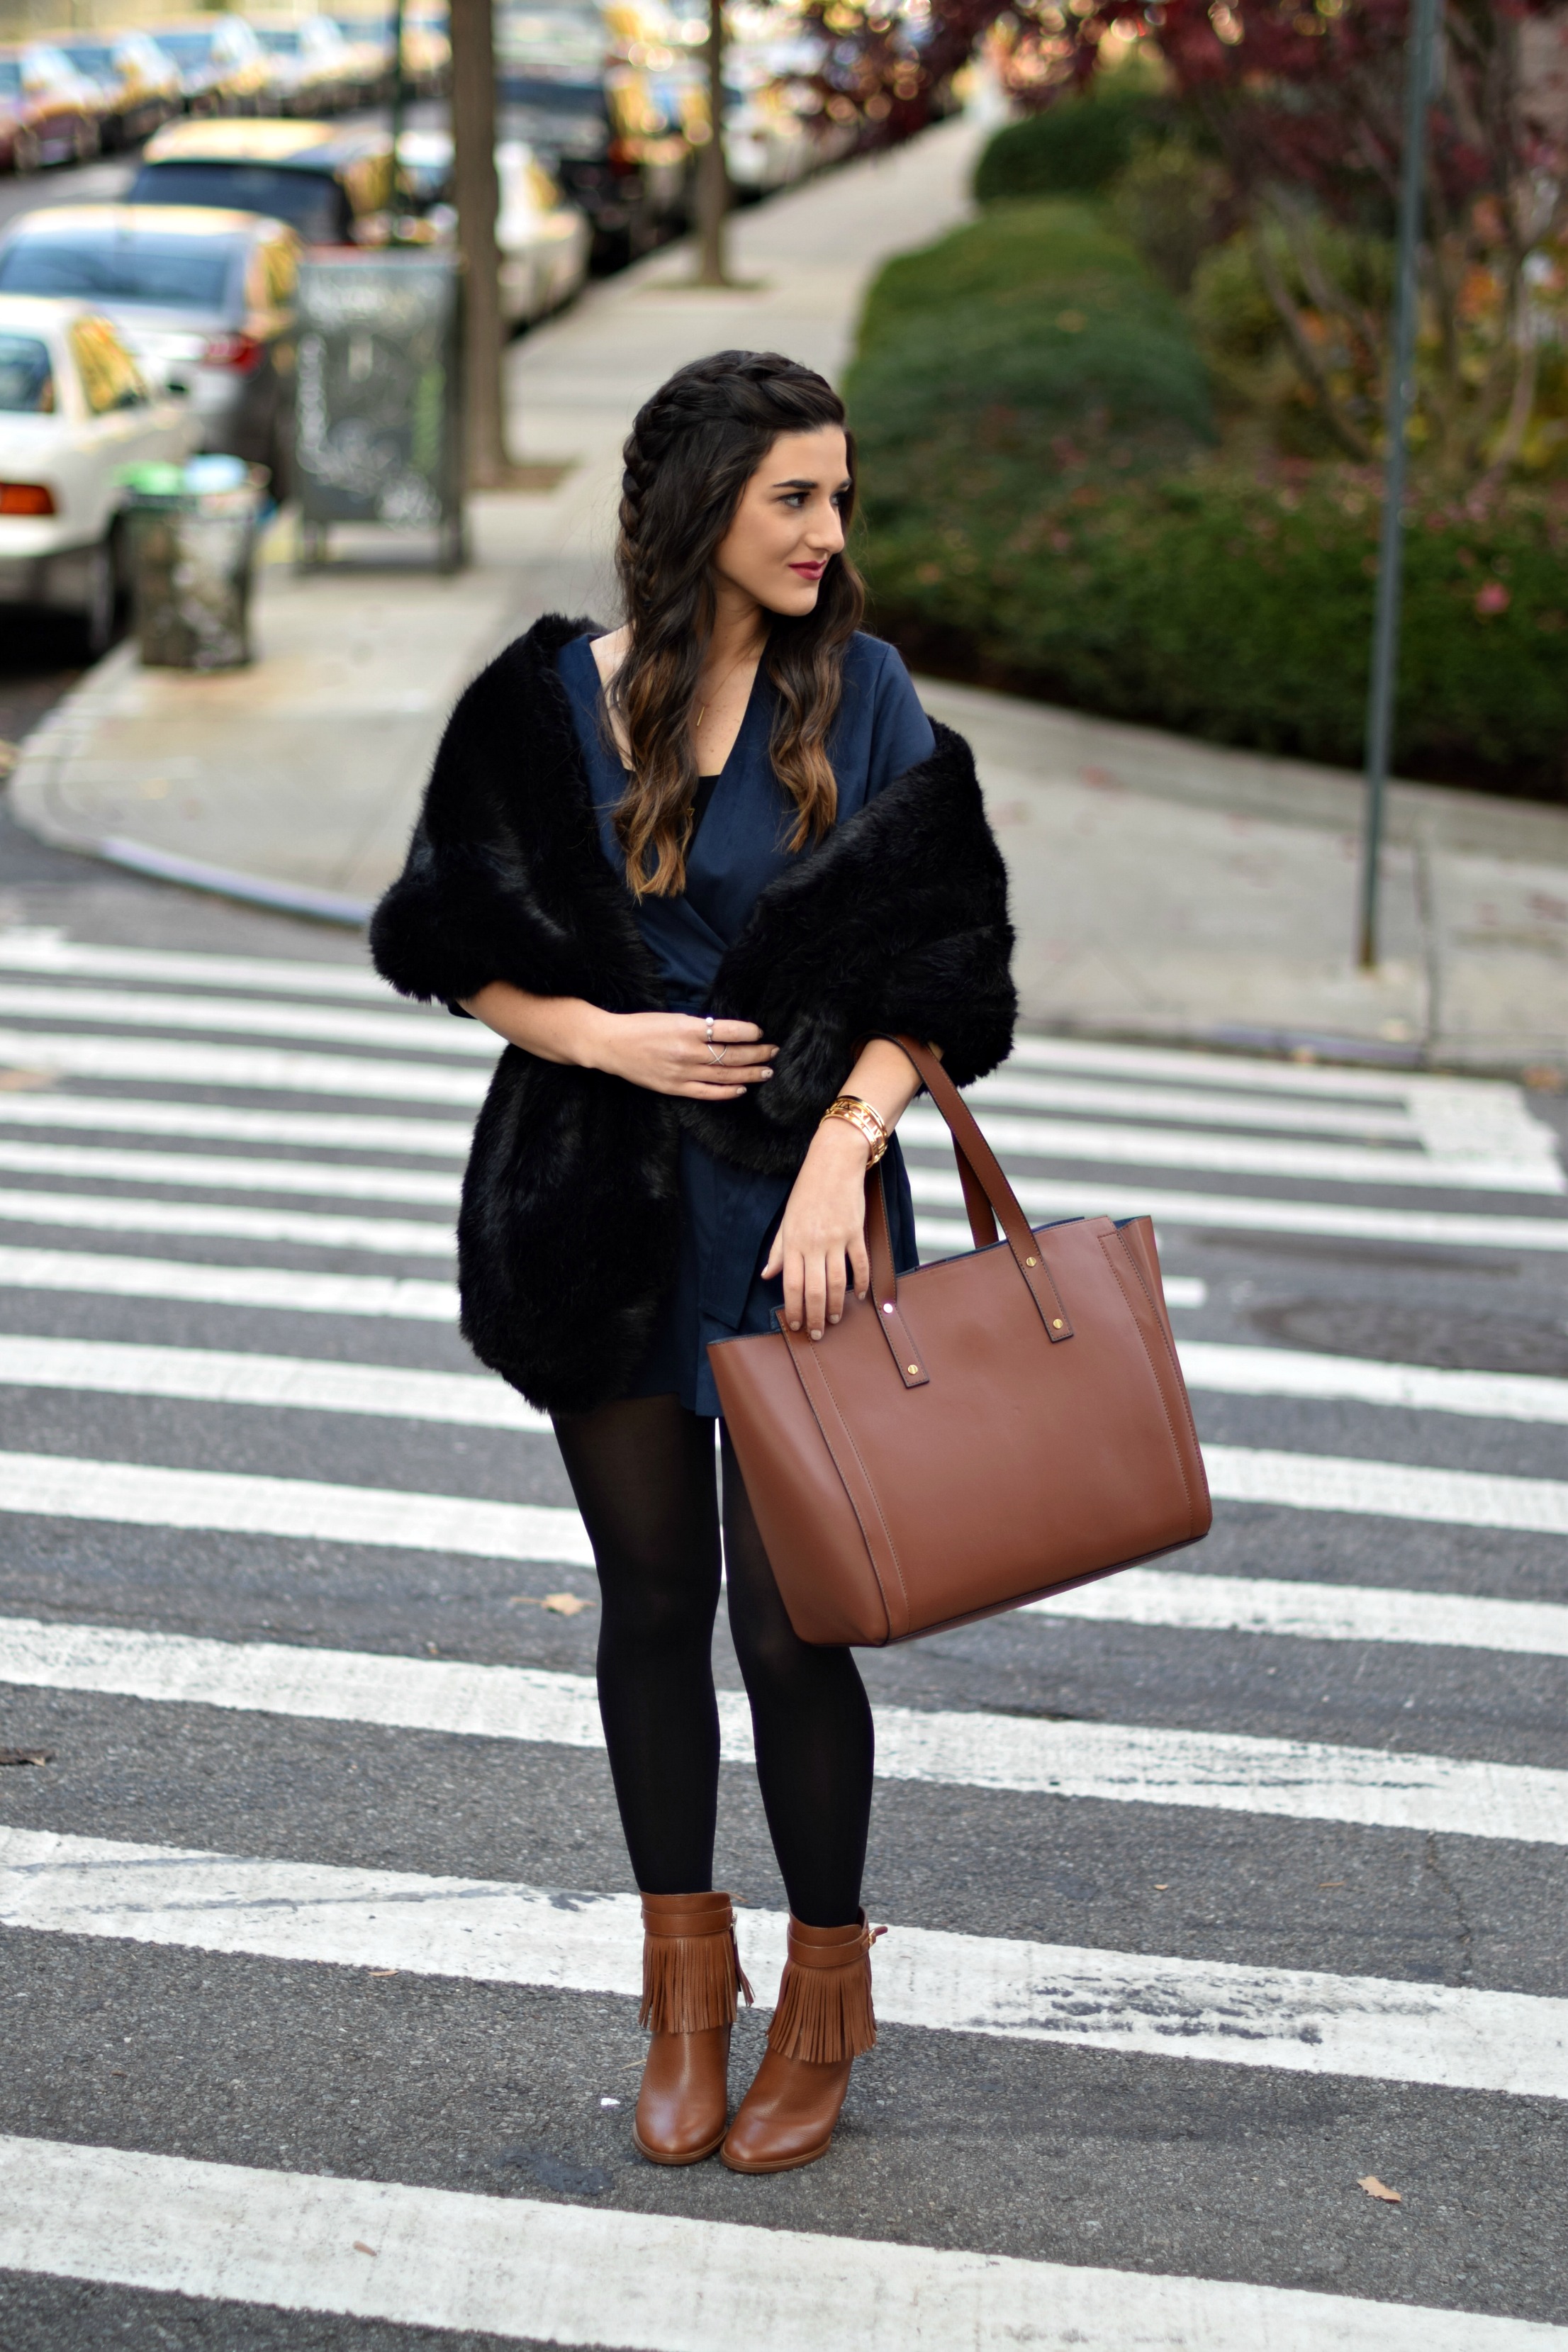 Navy Romper Fringe Booties Louboutins & Love Fashion Blog Esther Santer NYC Street Style Blogger Zara Plaid Coat Leather Sleeves Girl Women OOTD Outfit Soho Tote Ivanka Trump Accessories Shoes Boots Winter Black Tights Hair Braid Inspo Rings Jewelry.jpg